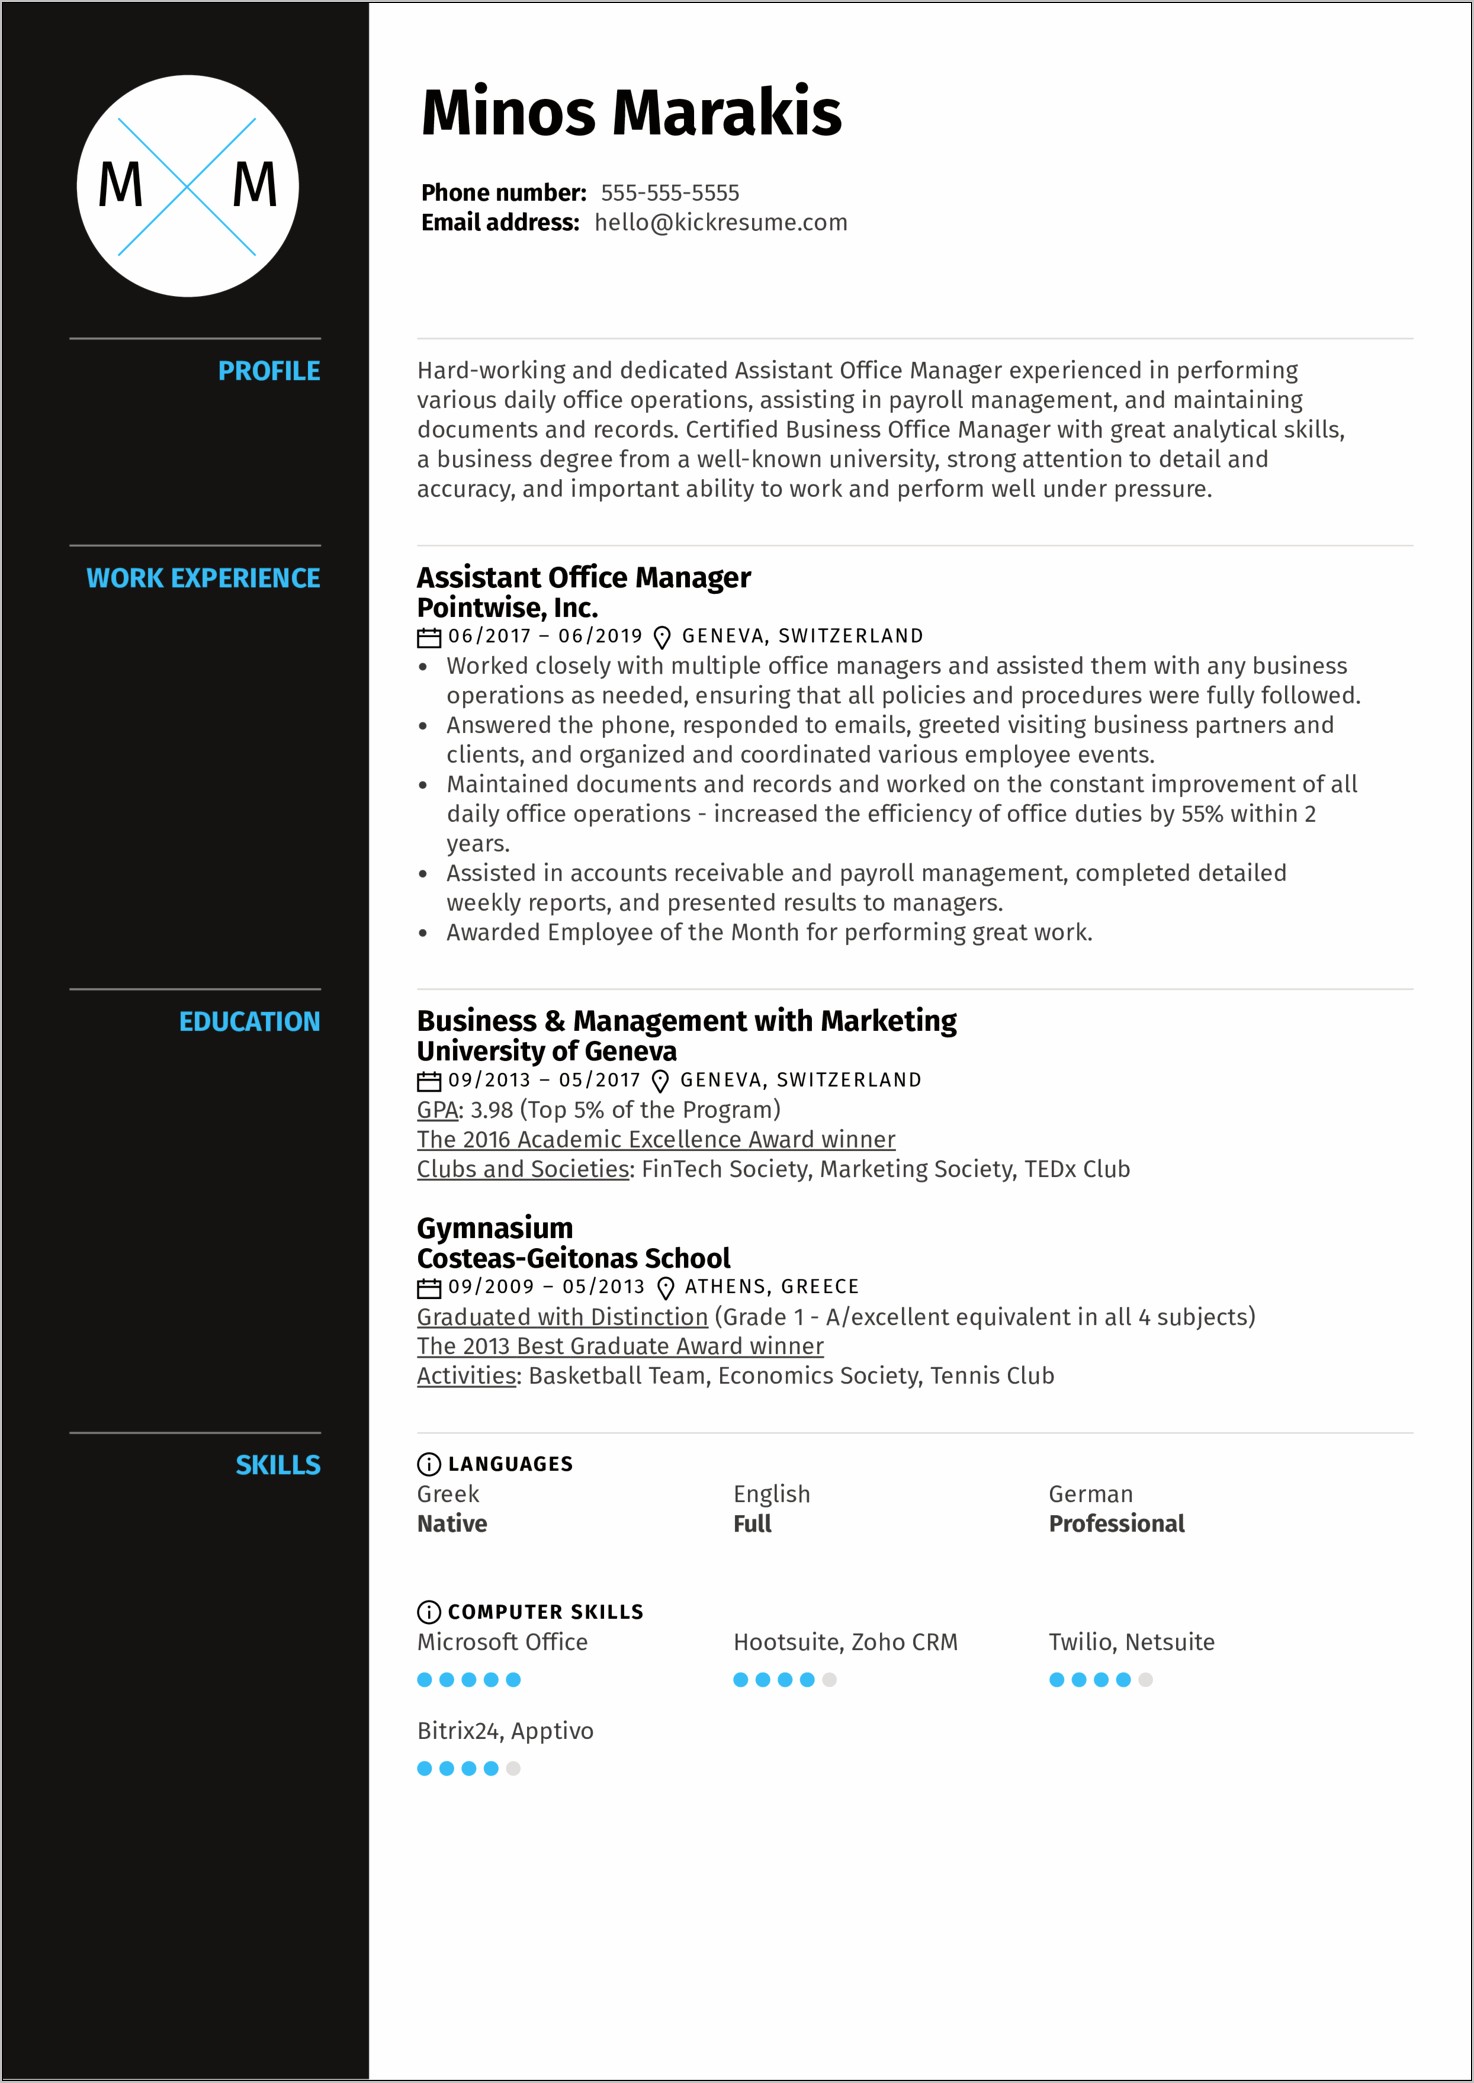 Resume Sample For An Experienced Office Manager